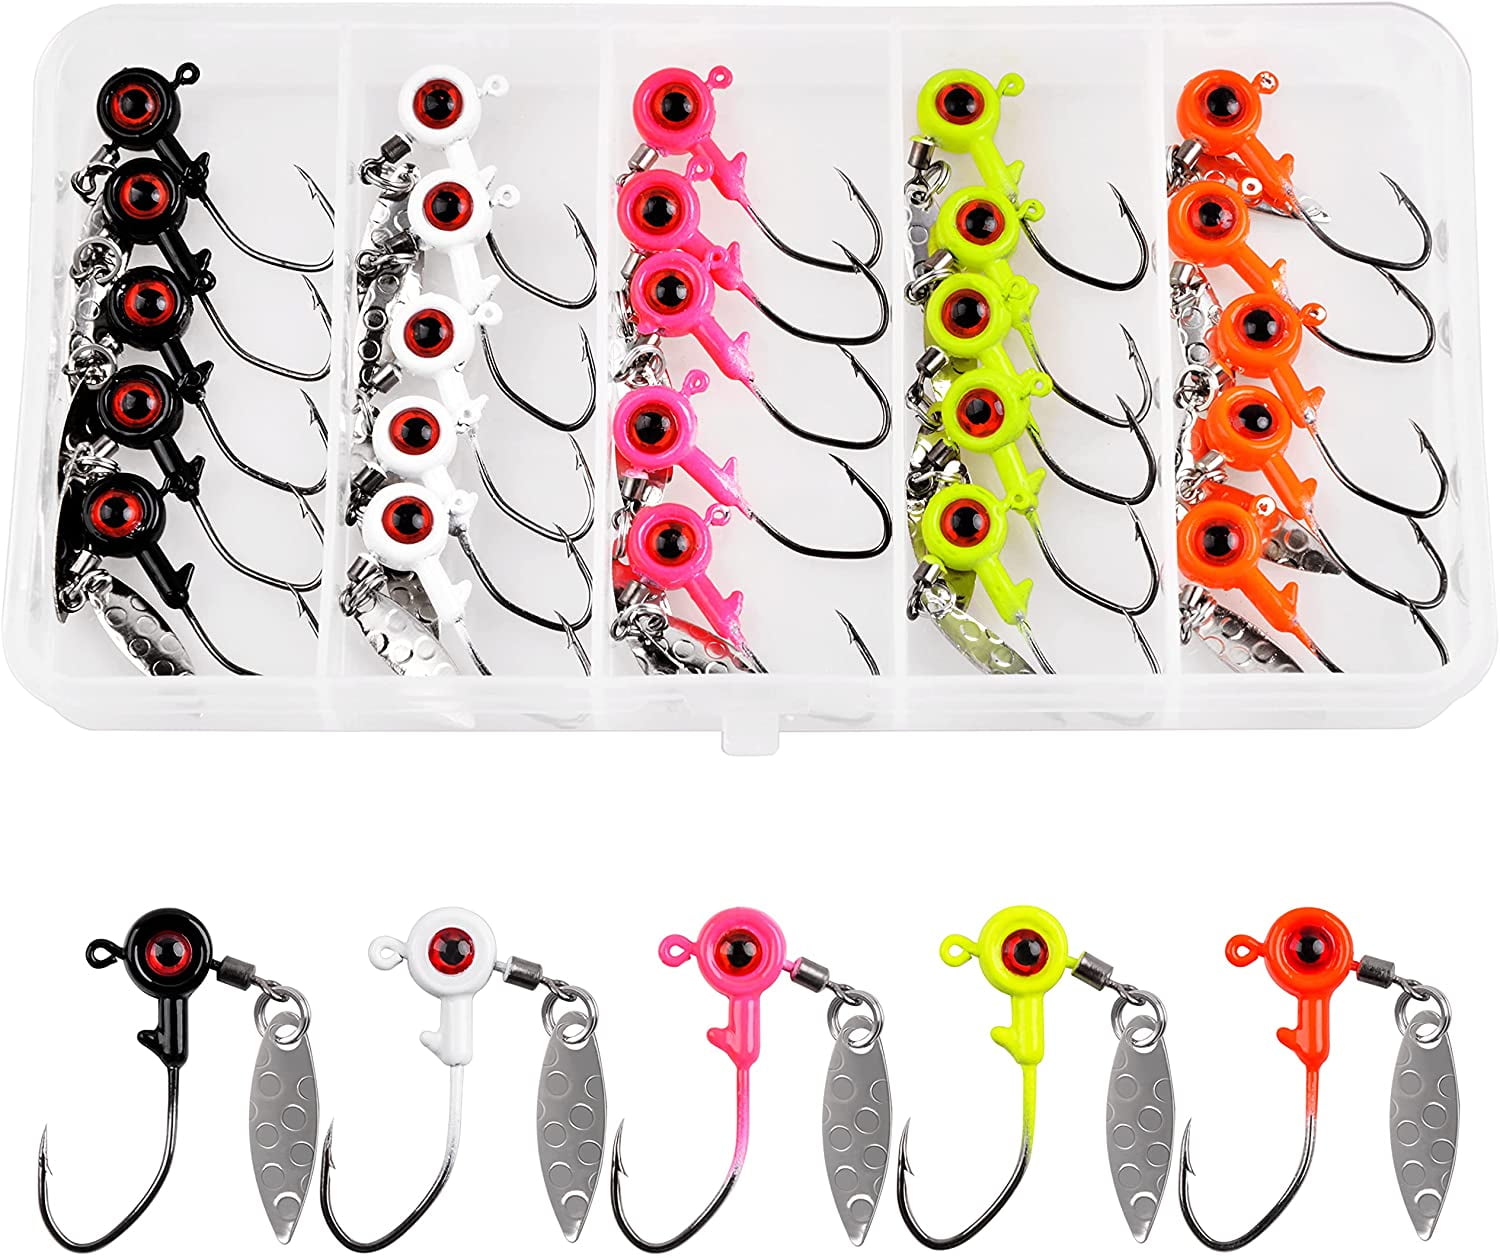 OROOTL Crappie Fishing Jig Heads Kit,25pcs Underspin Lures Jig Head with  Spin Blade Eye Ball Painted Jigs Hooks 